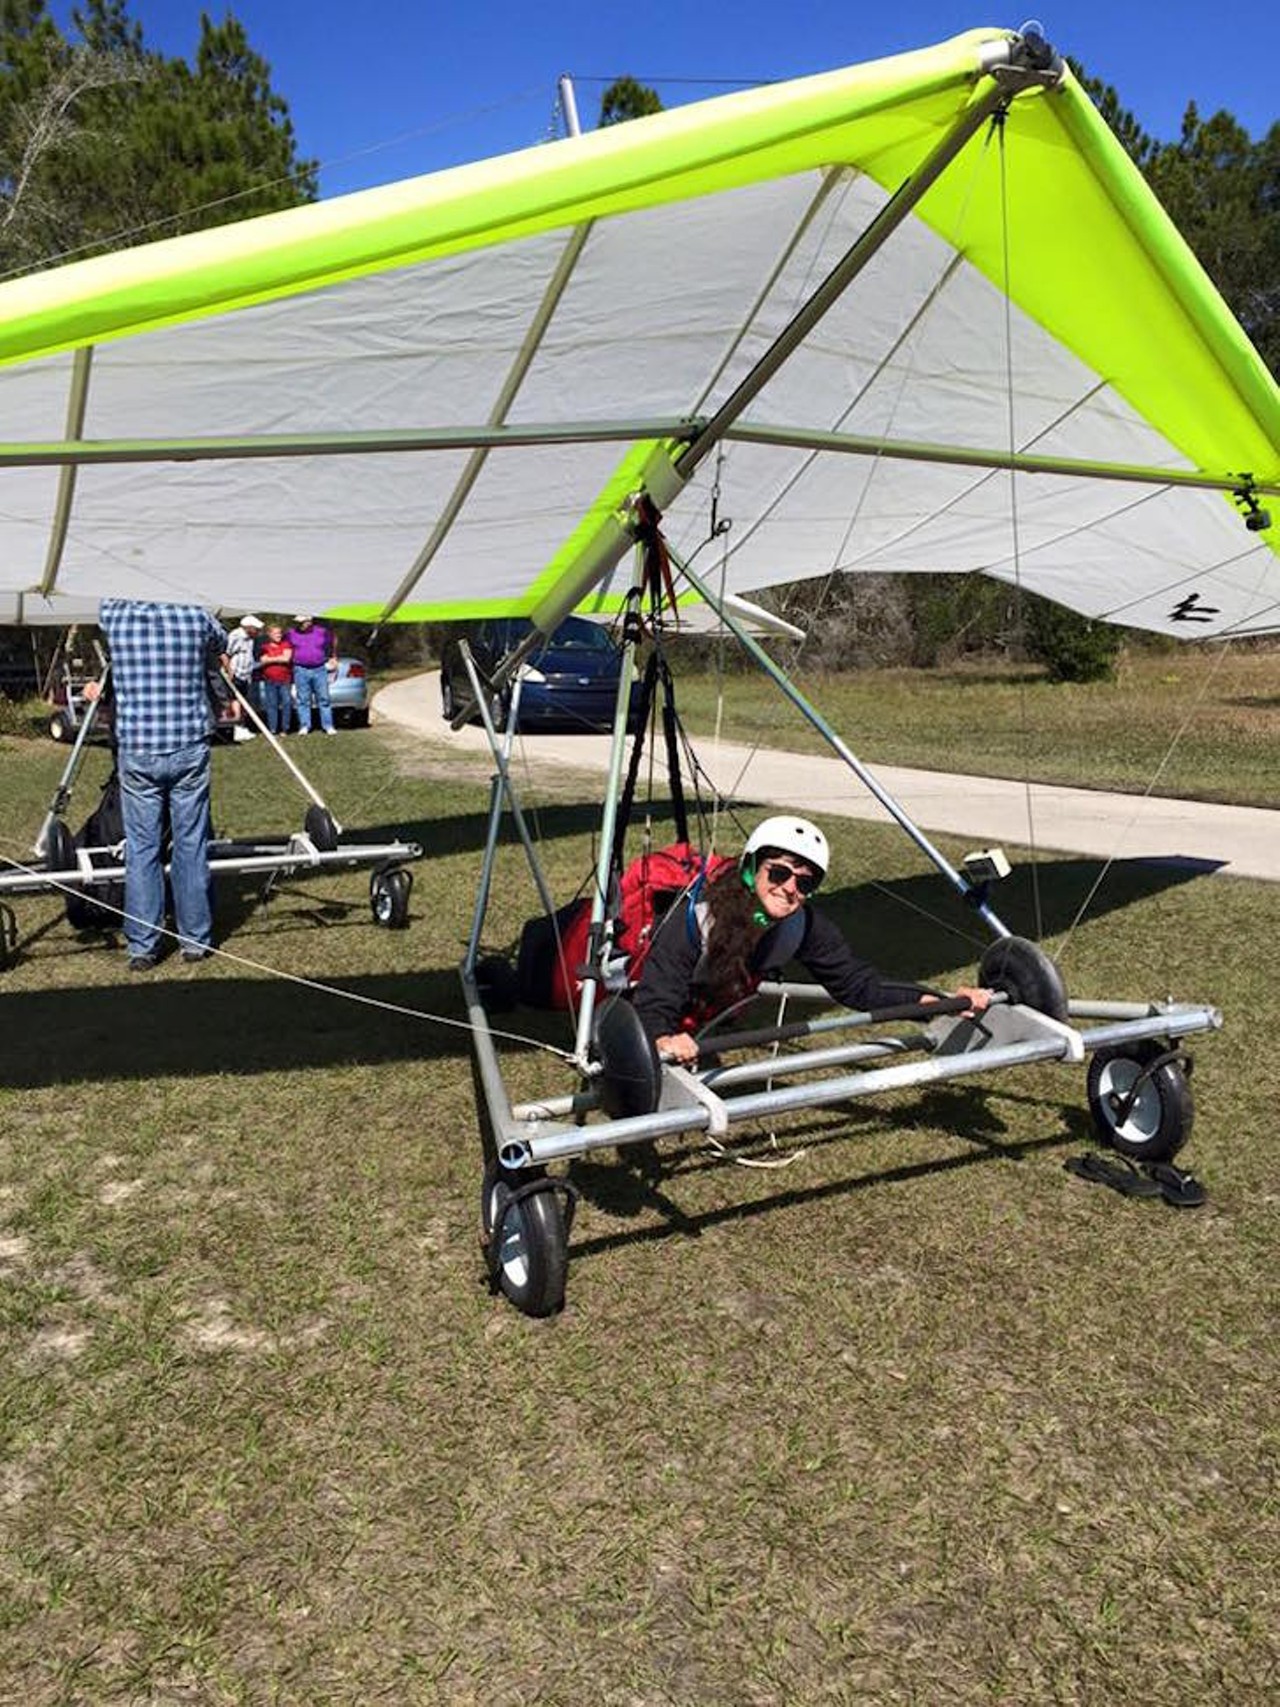 Wallaby Ranch
1805 Deen Still Road, Davenport | 863-424-0070
Wallaby Ranch offers a secluded setting for those adventurous enough to learn how to hang glide. If you&#146;ve never flown before, don&#146;t worry, they have courses for people at all skill levels. 
Photo via Wallaby Ranch/Facebook